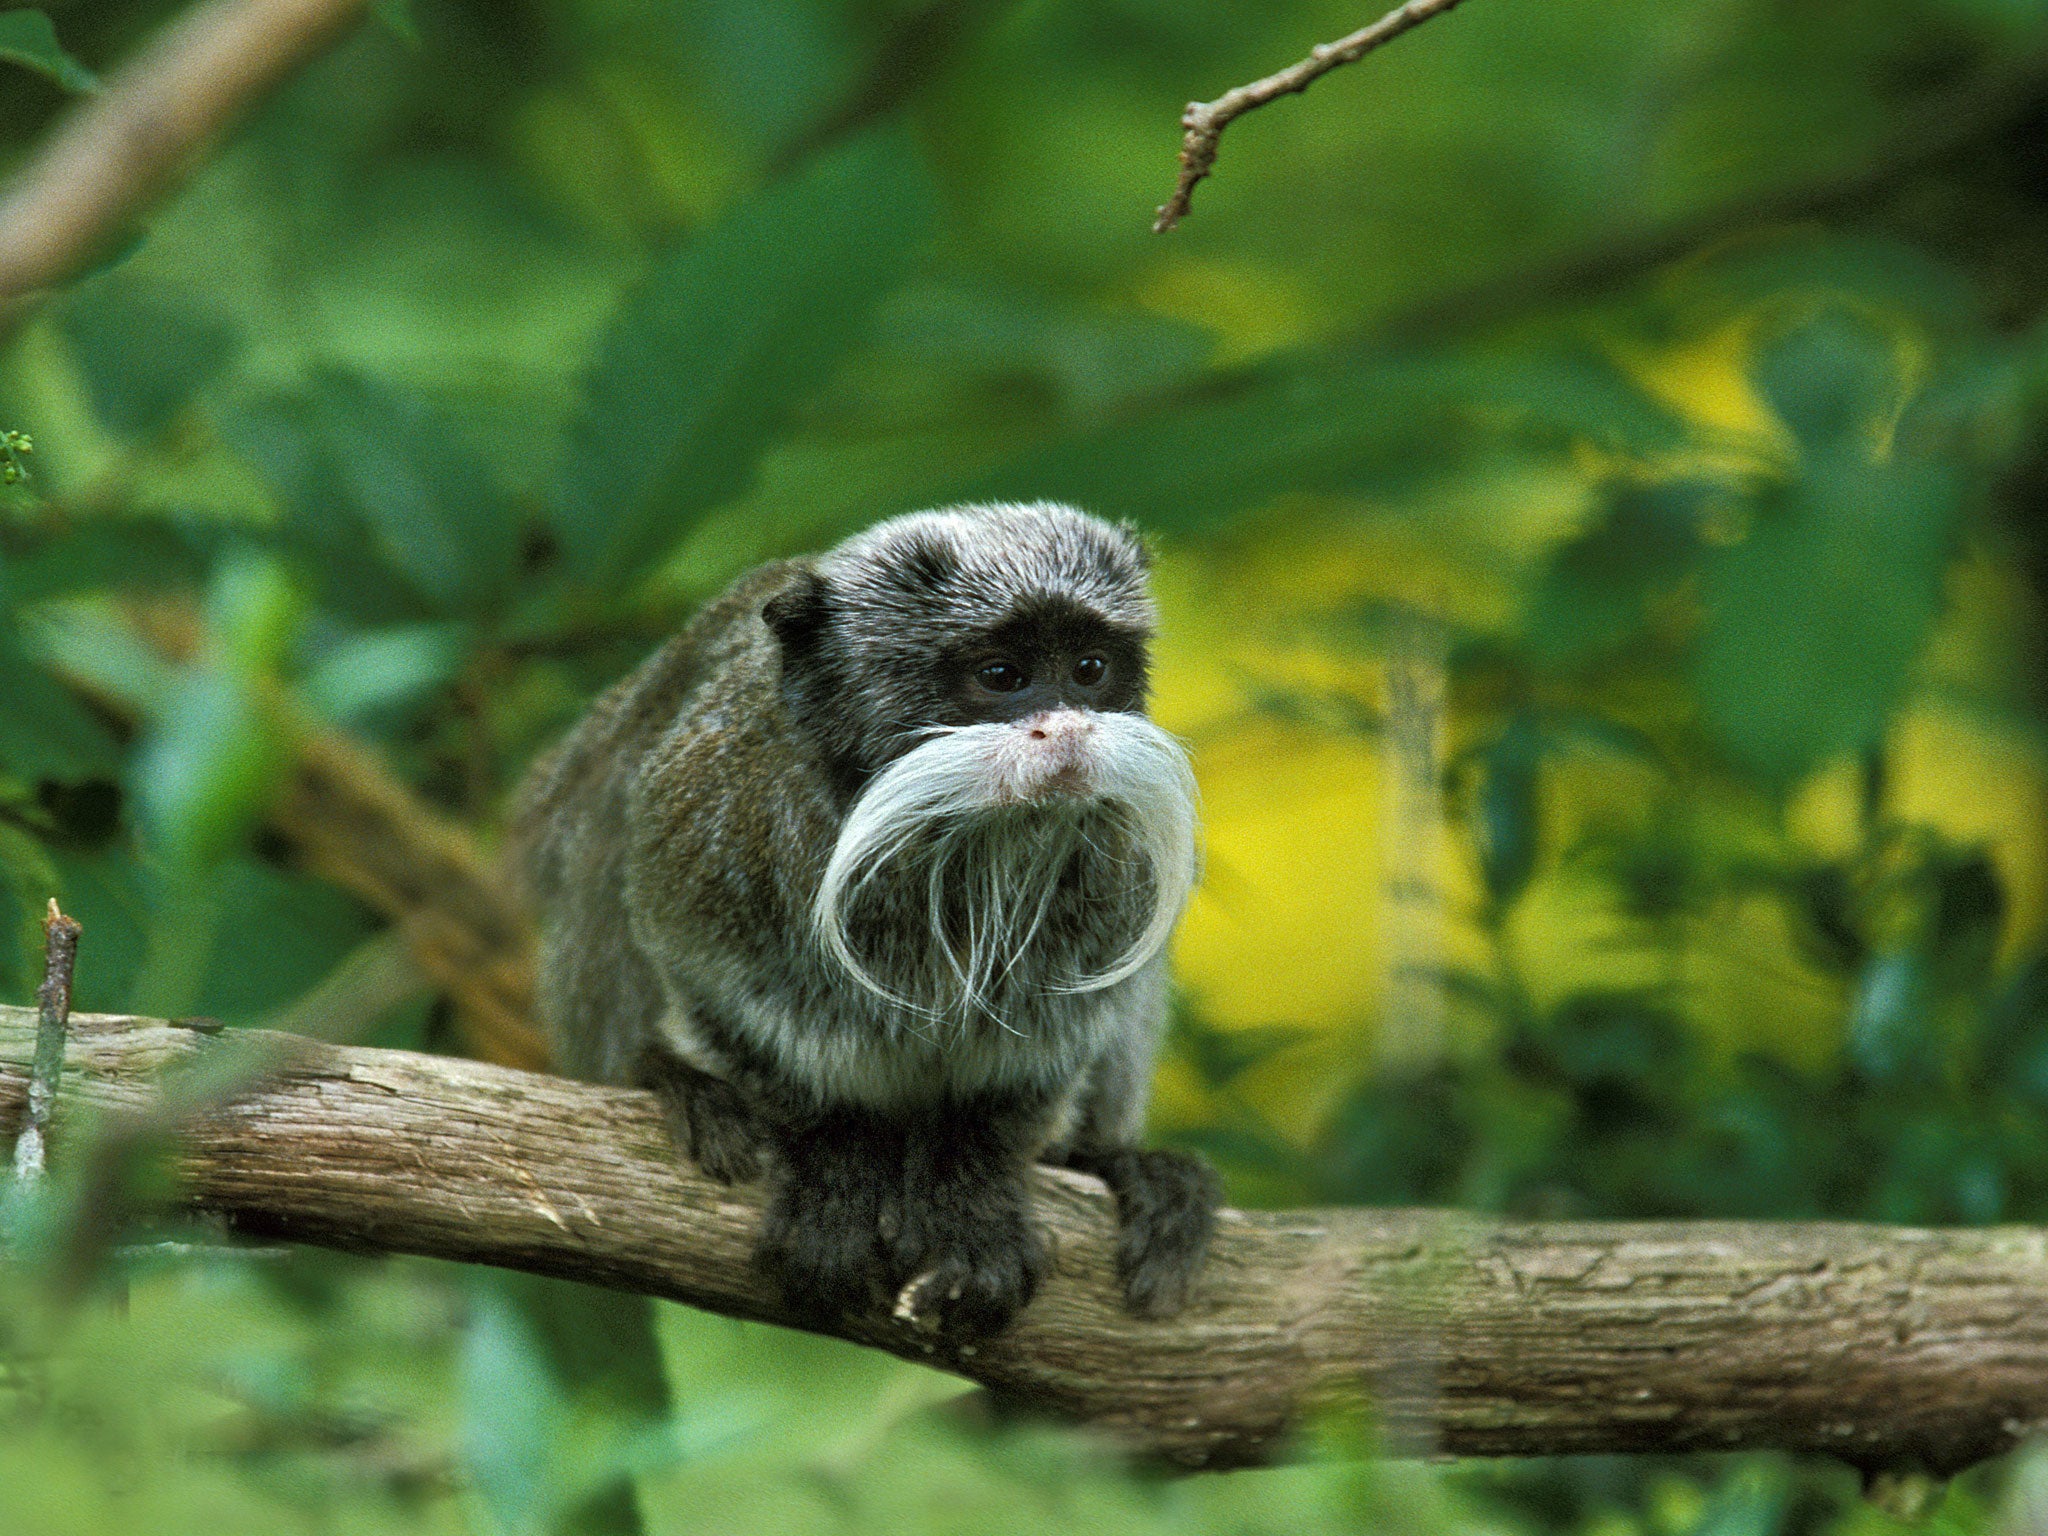 Species of tamarin monkeys vary in appearance, though all weigh less than 1kg. Many (including the Emperor tamarin, pictured) sport distinctive facial hair.